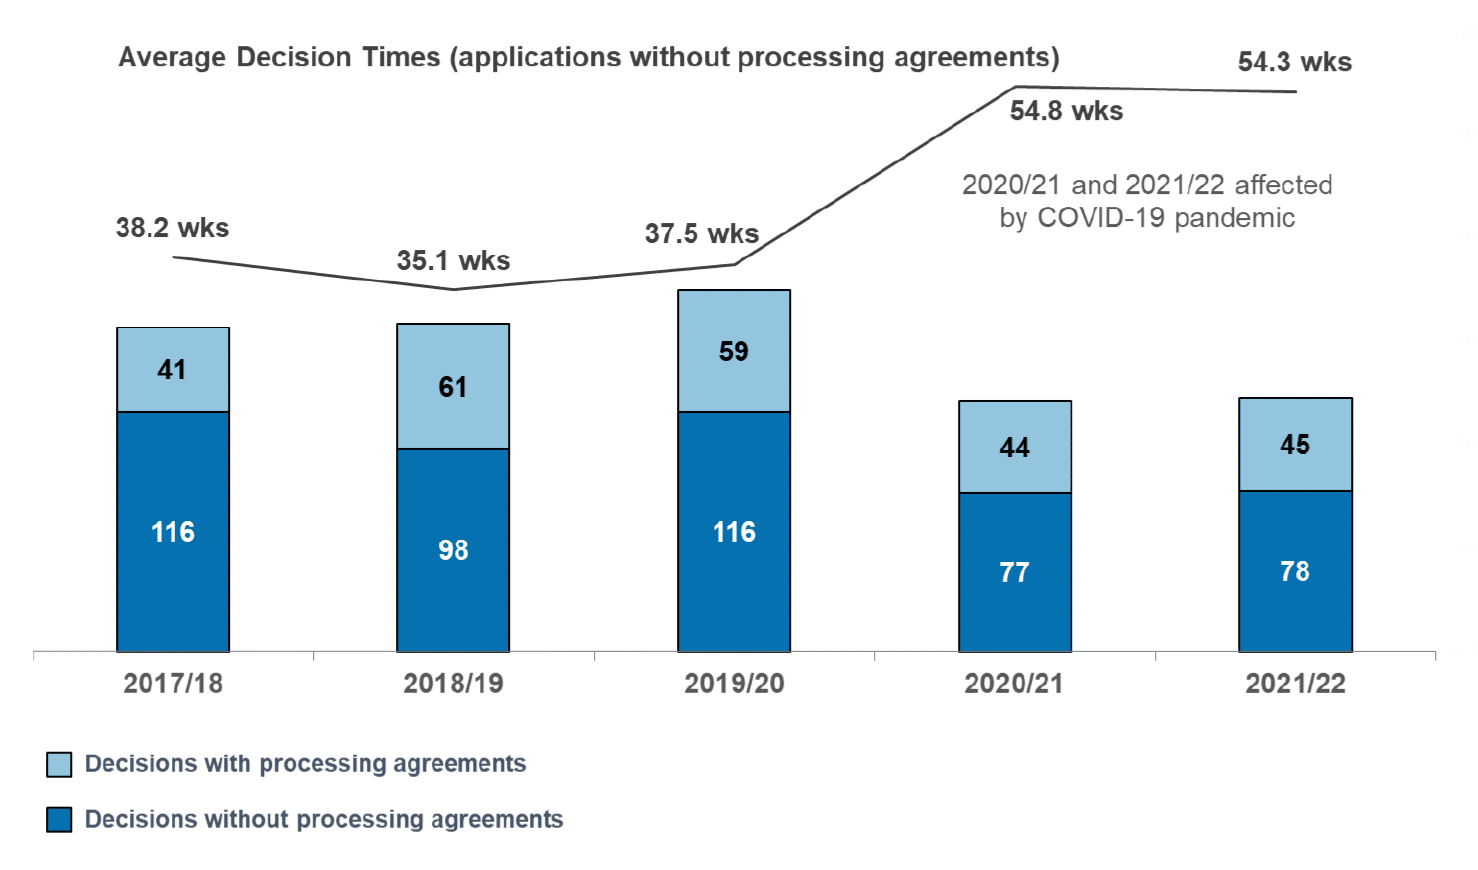 A stacked column chart showing number of major housing applications decided since 2017/18. Also a line chart of average decision times for major housing applications without processing agreements. Numbers of applications dipped in 2020/21 and 2021/22. Average decision times were much higher in 2020/21 and 2021/22 and were almost 17 weeks longer than 2019/20.